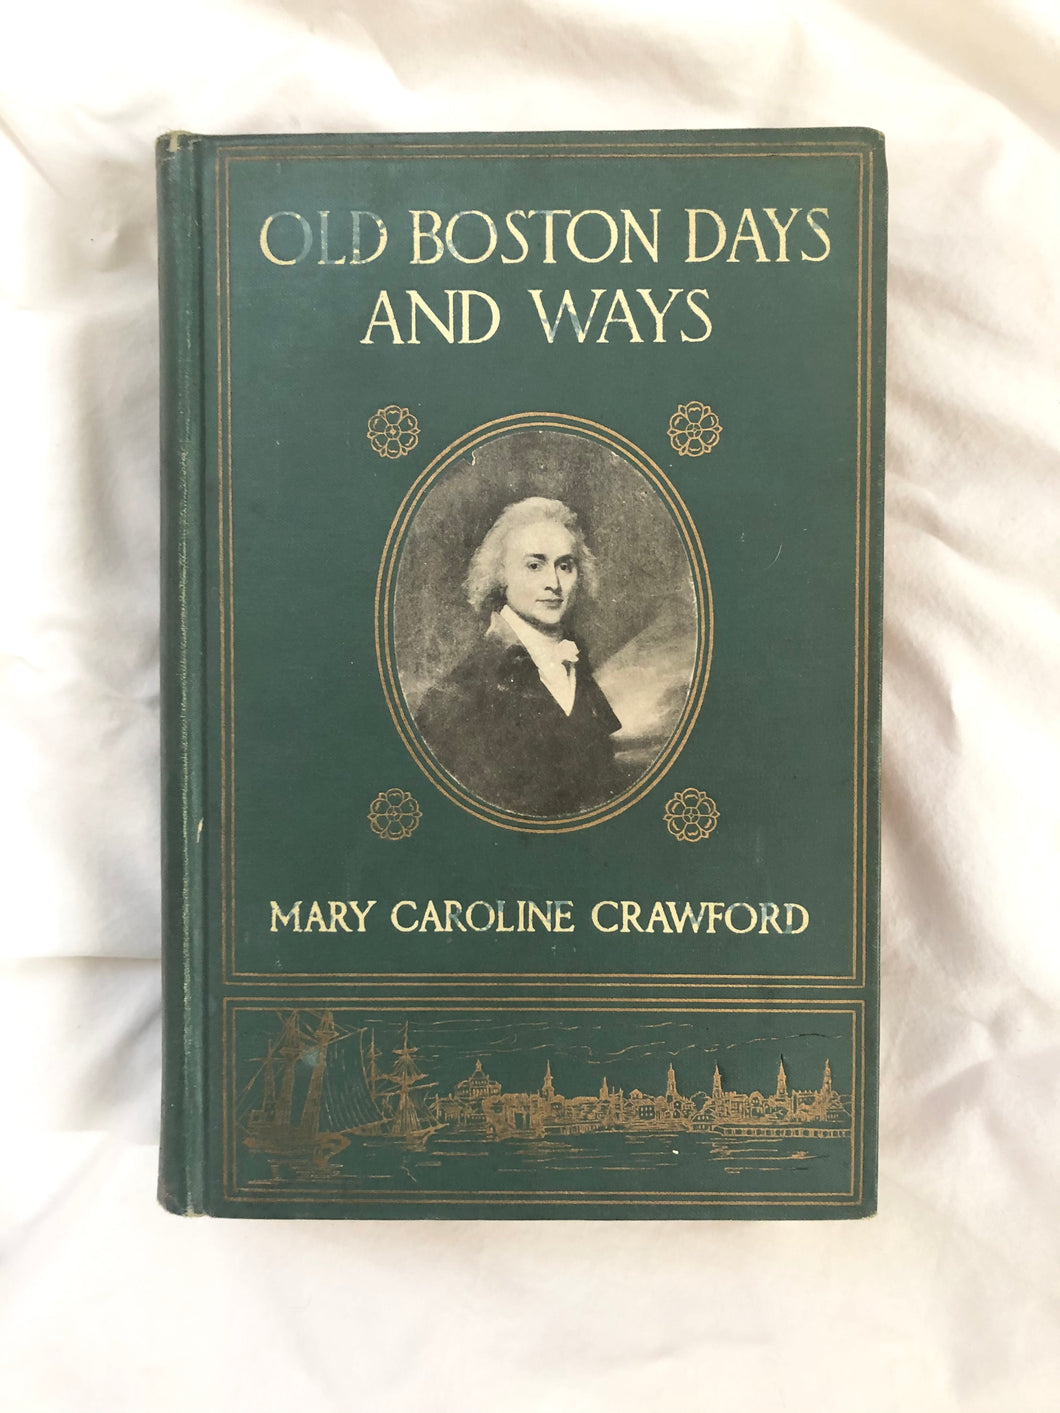 “Old Boston Days & Ways From the Dawn of the Revolution Until the Town Became a City” by Mary Caroline Crawford